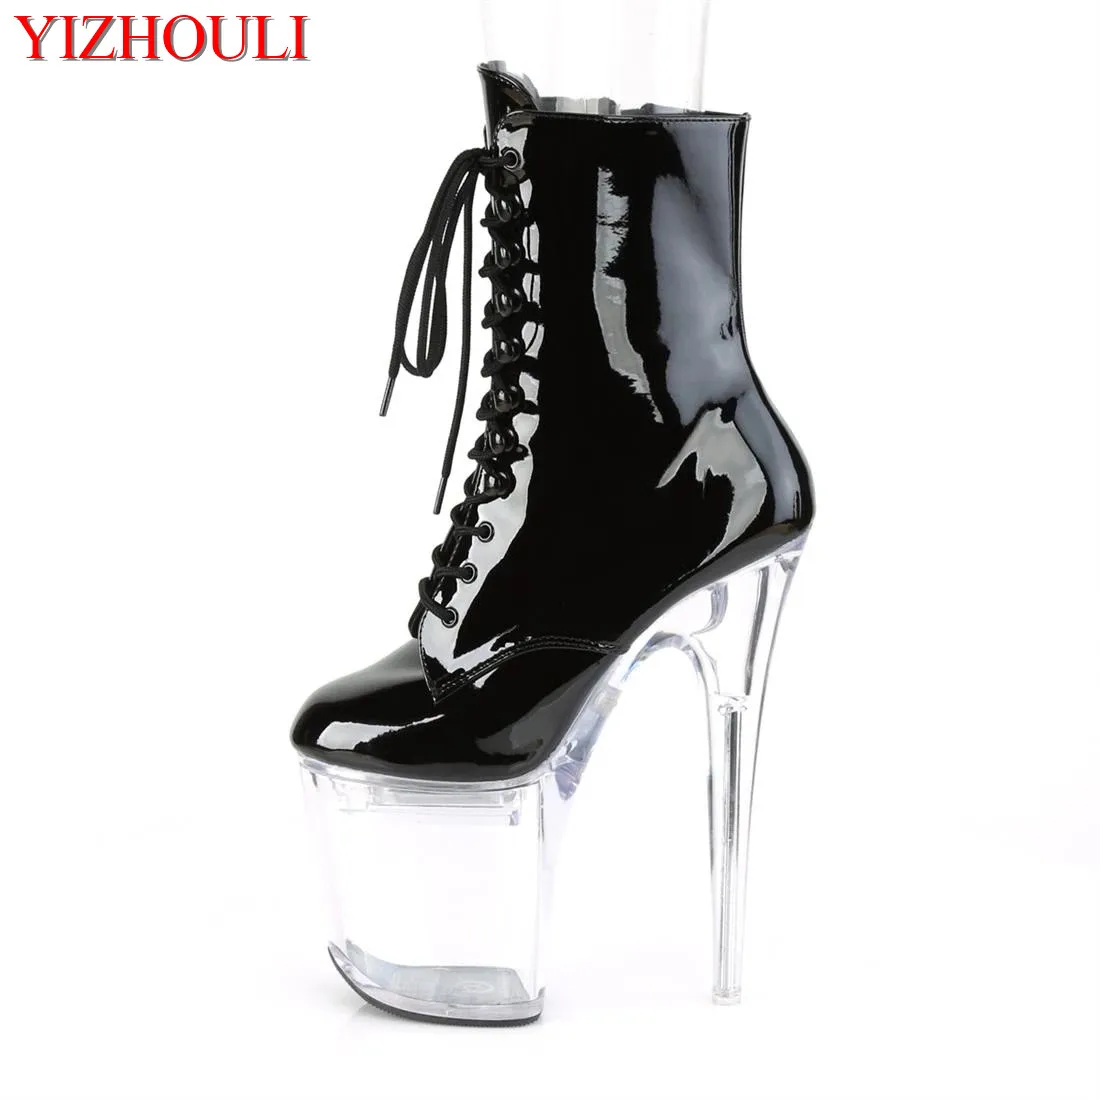 

Banquet PU upper 20 cm stiletto heels, 8 inch model stage show boots, nightclub pole dancing ankle dance shoes